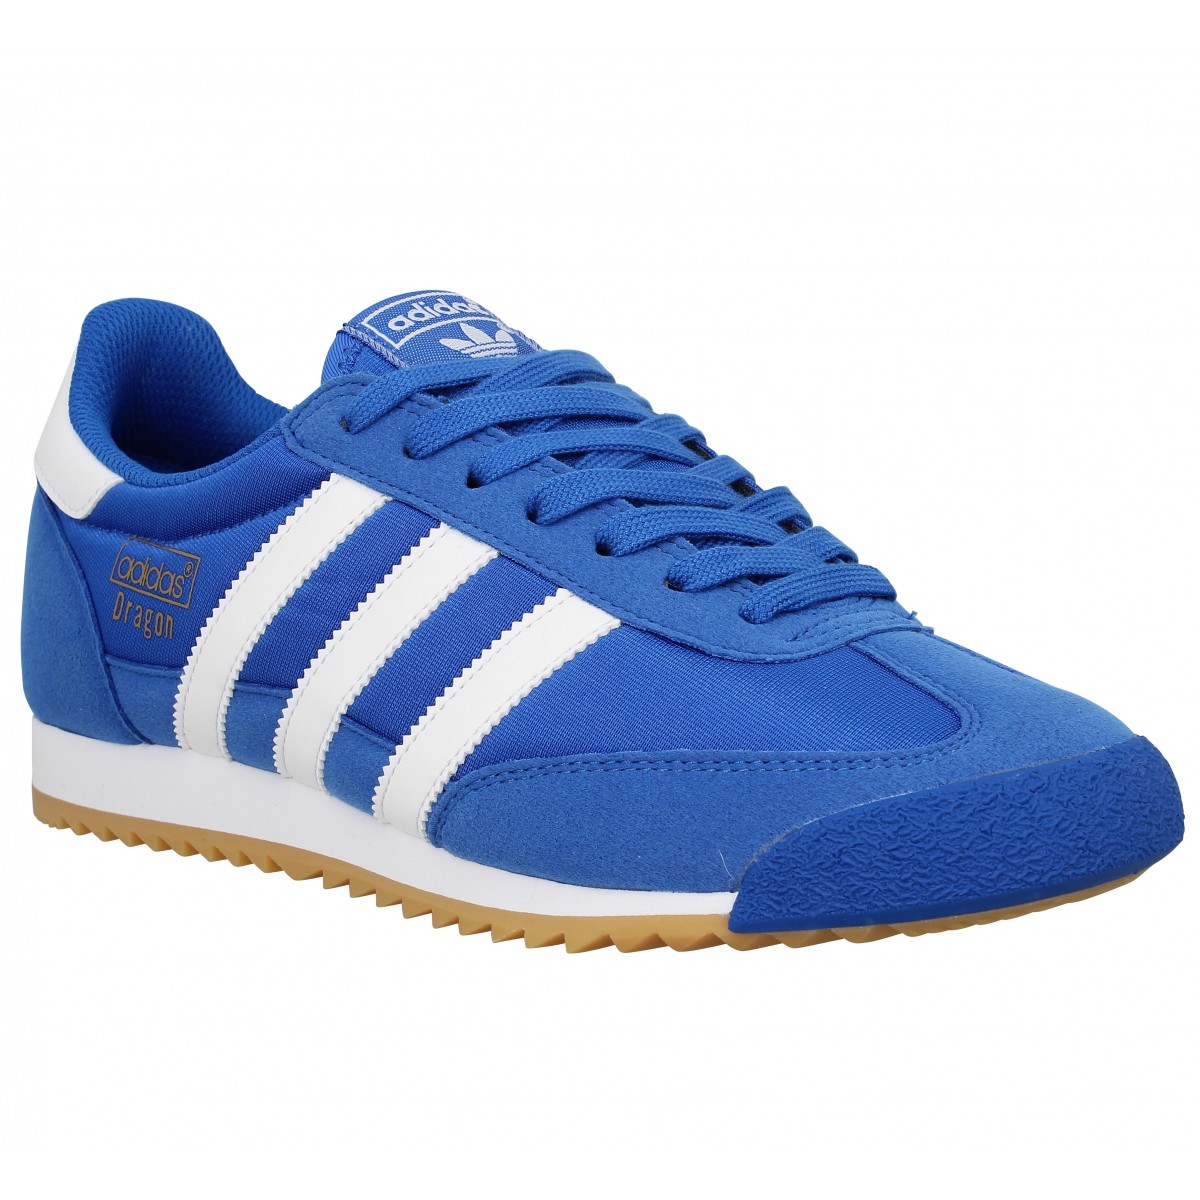 adidas dragons homme